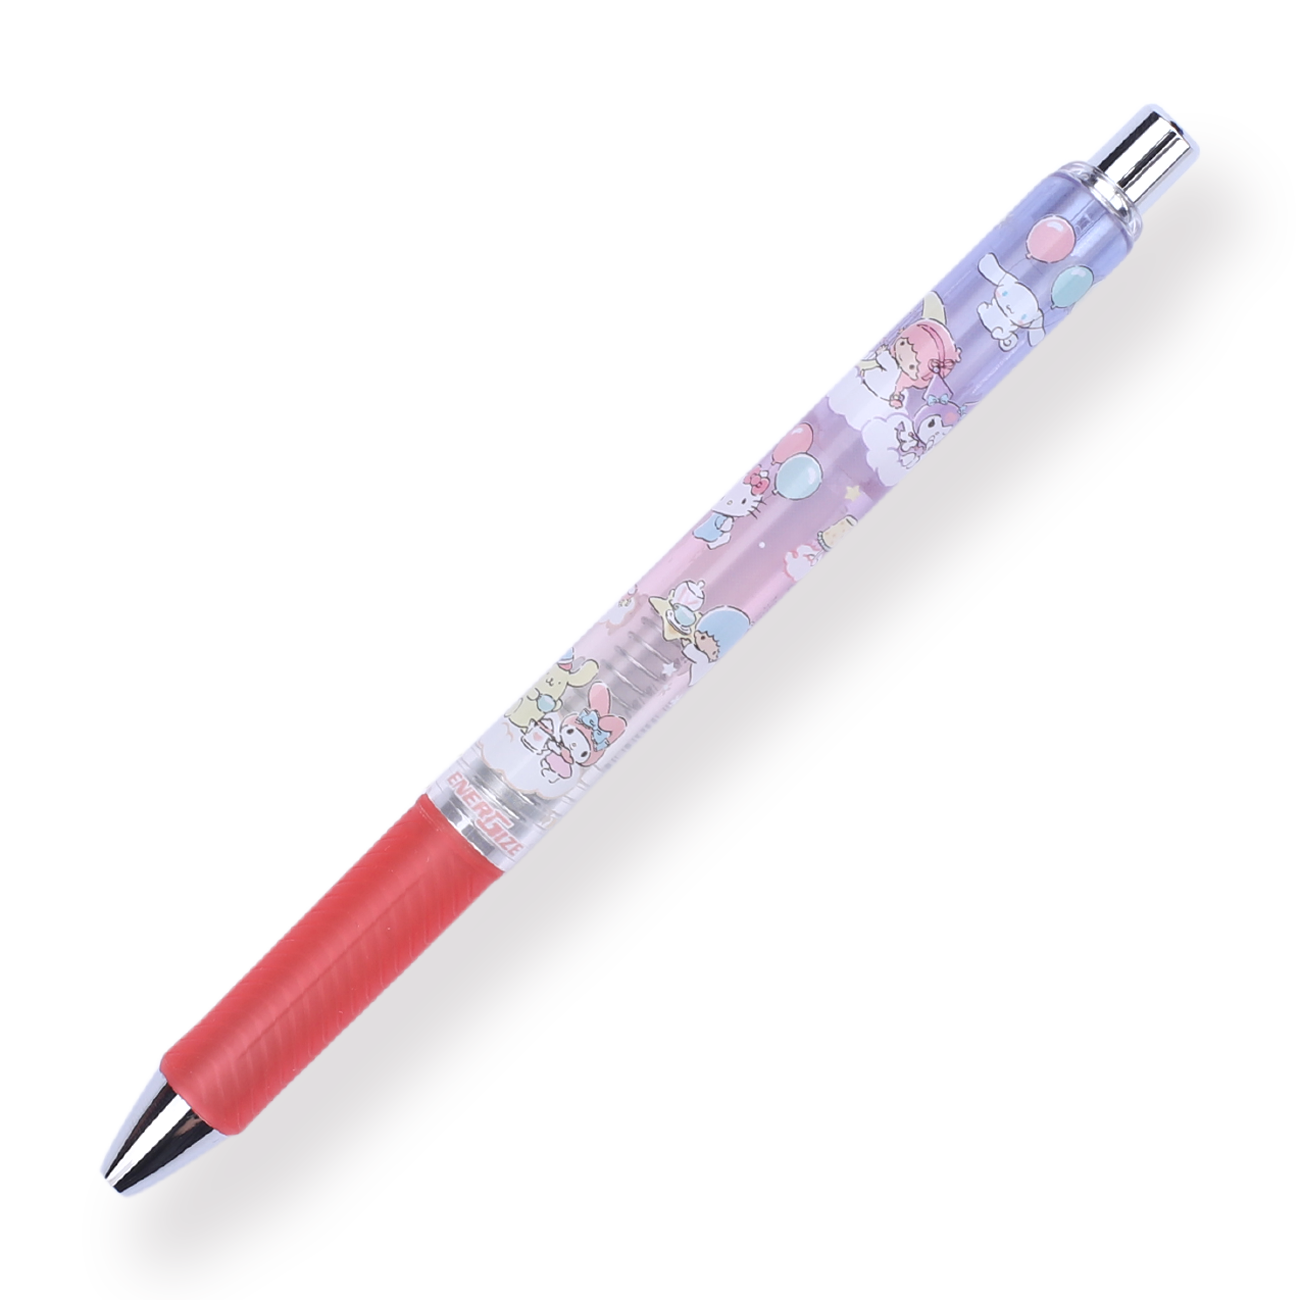 Pentel EnerGize x Sanrio Mechanical Pencil - 0.5 mm - Sanrio Family - Red - Stationery Pal